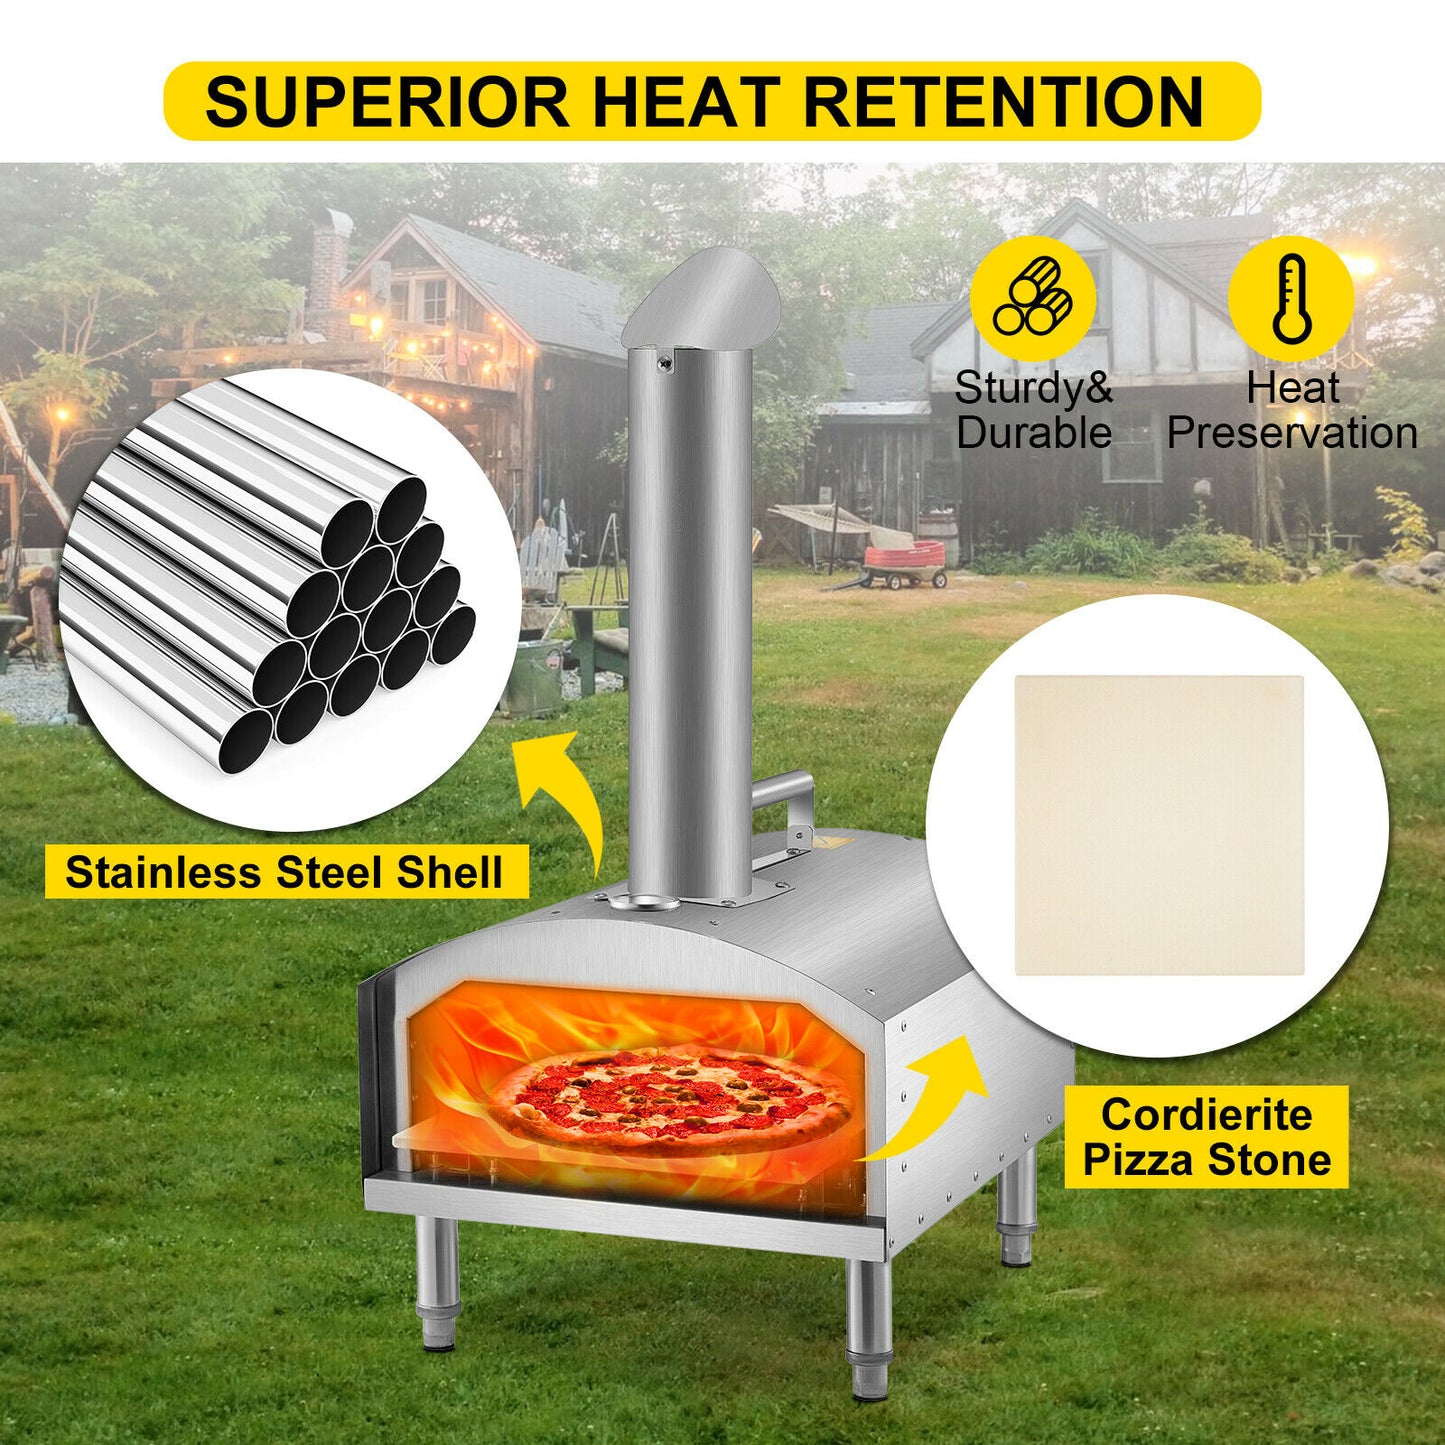 VEVOR 12&quot; Portable Pizza Oven Wood Fired Food Grade Stainless Steel for Outdoor BBQ Picnics Baking Pizza, Bread, Shrimp, Sausage - youronestopstore23